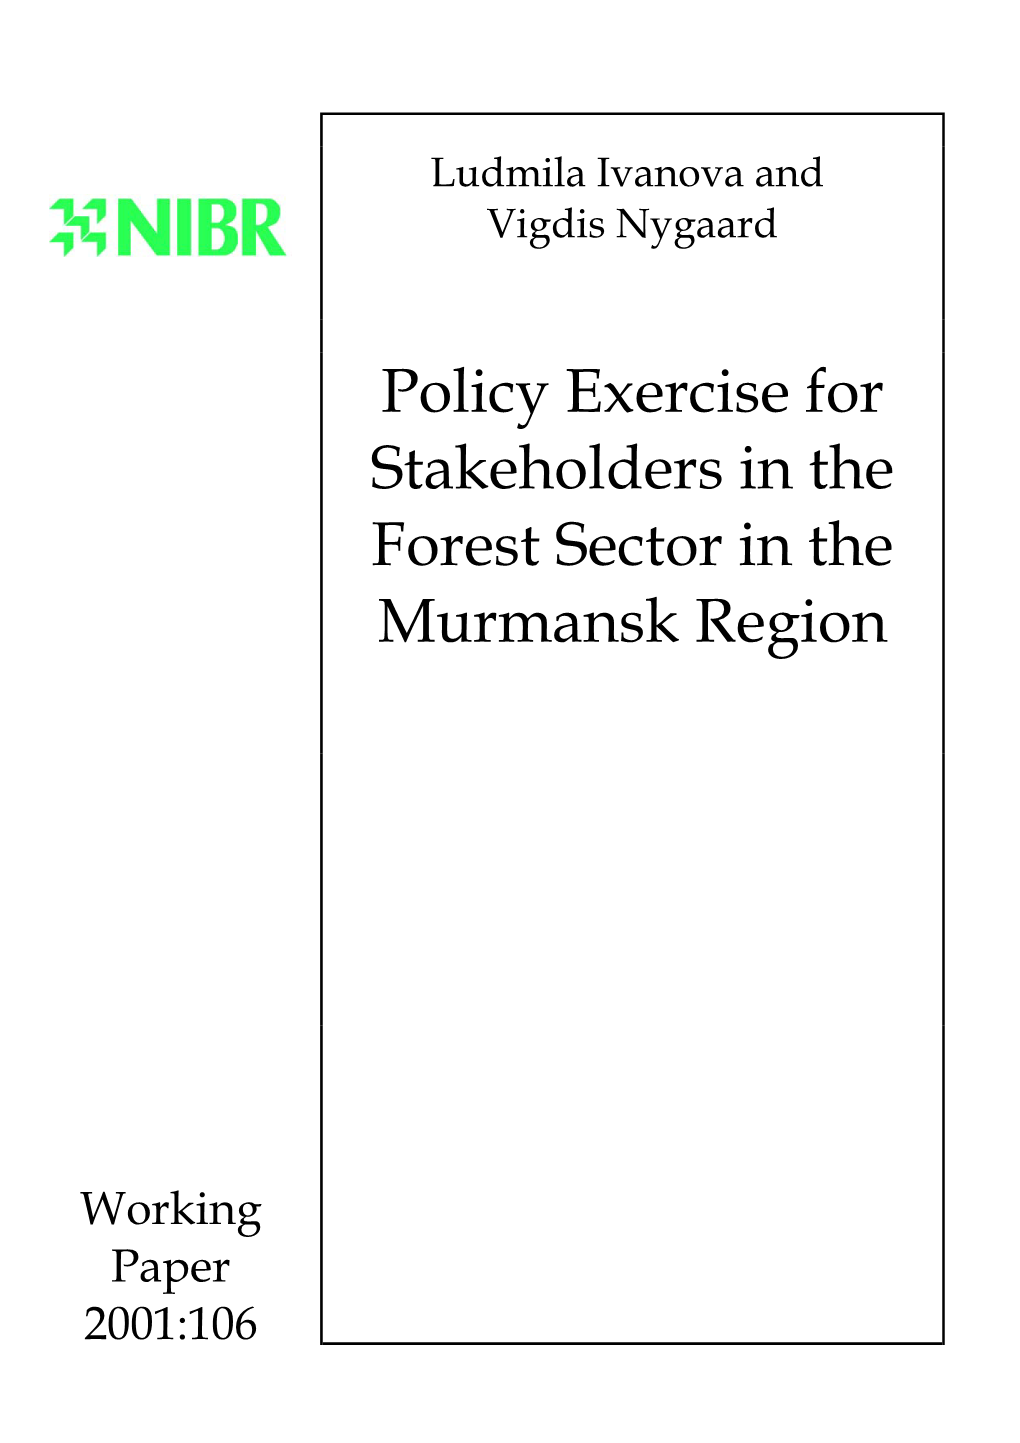 Policy Exercise for Stakeholders in the Forest Sector in the Murmansk Region